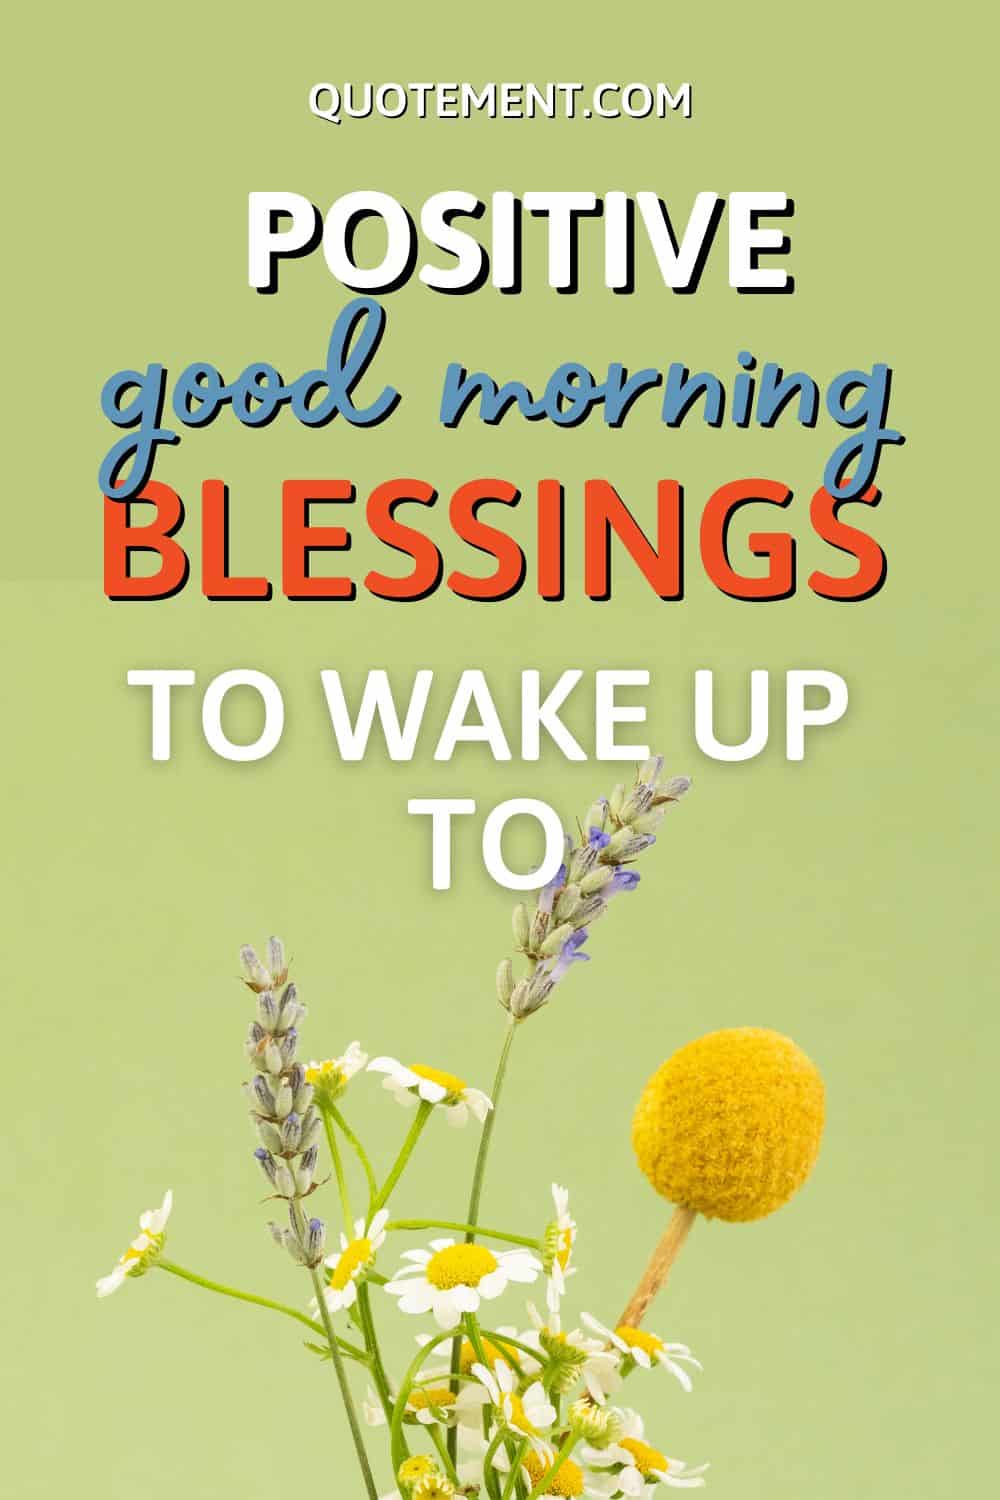 150 Best Positive Good Morning Blessings To Wake Up To 